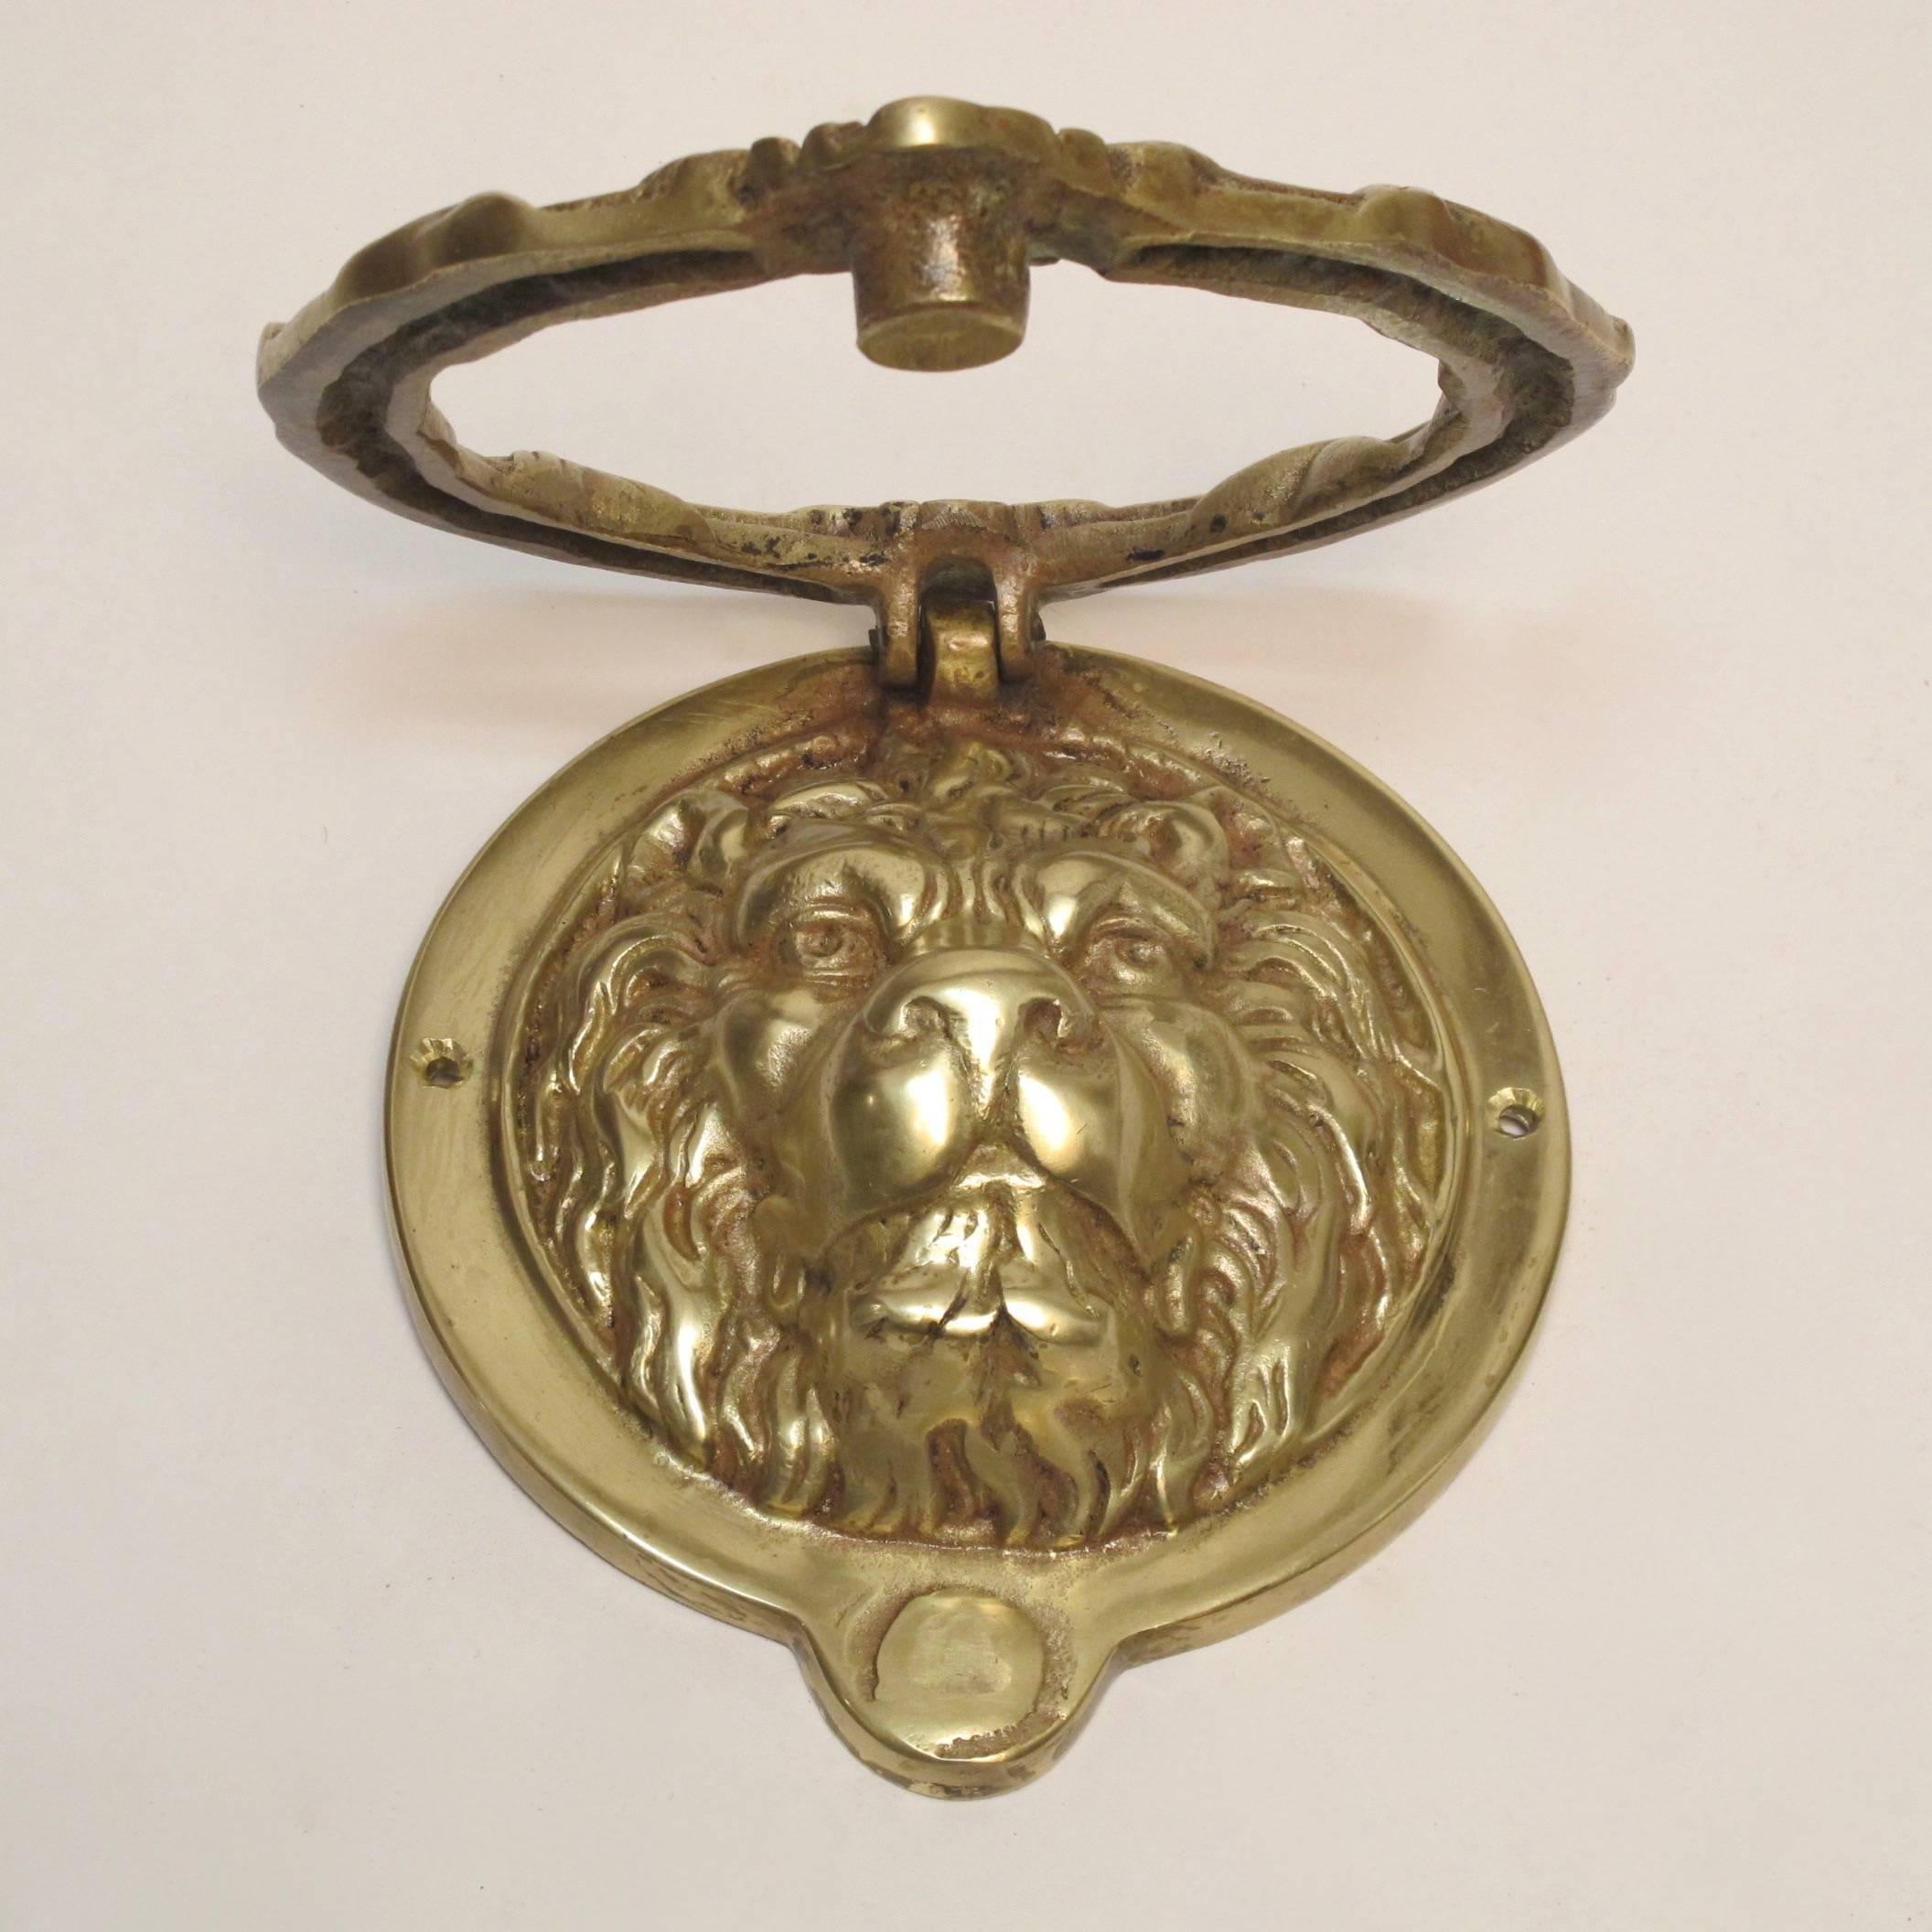 A large scale wonderfully cast brass lion doorknocker. Recently polished, early to mid-20th century.